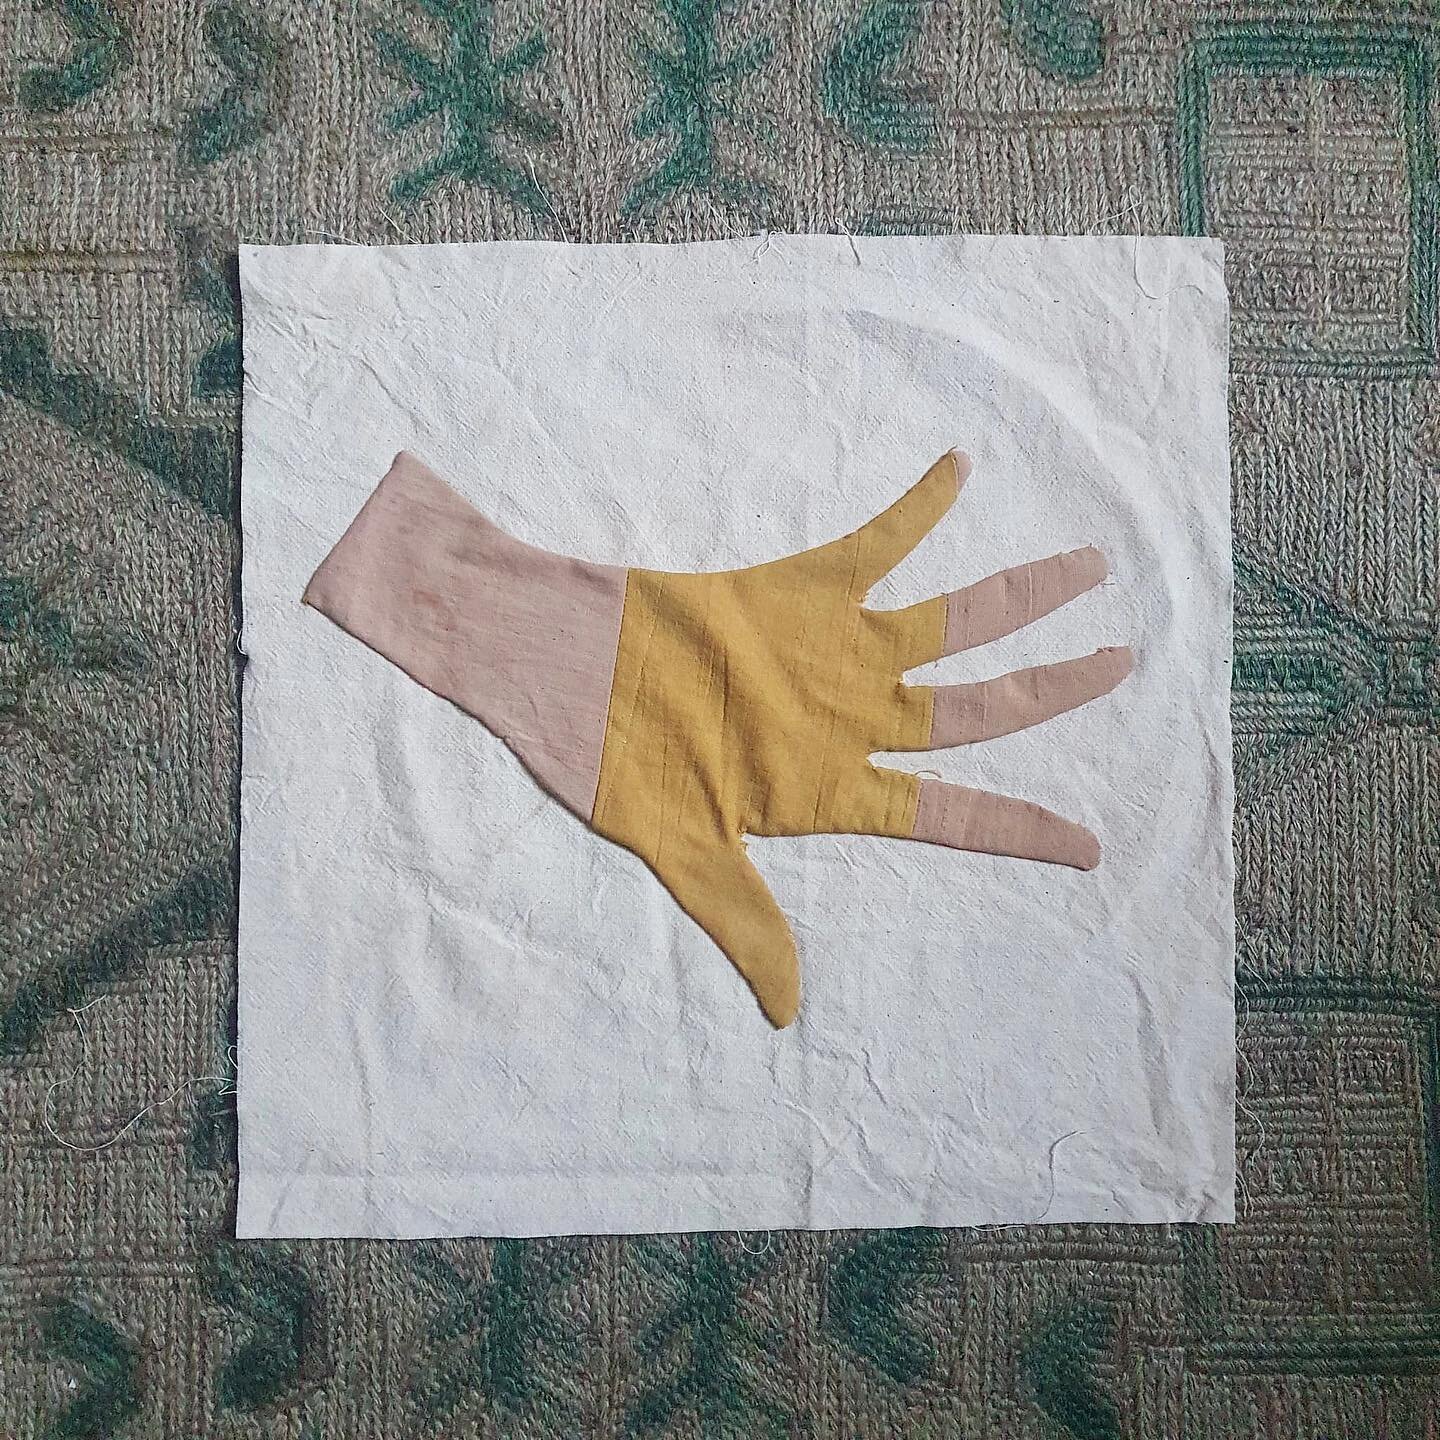 I&rsquo;ve made this quilt block of a hand for a fundraiser organised by @eddier0se to raise money for @medicalaidpal. Each block, designed by different artists and crafts people, will be sewn and quilted together by Eddie and then raffled off in a c